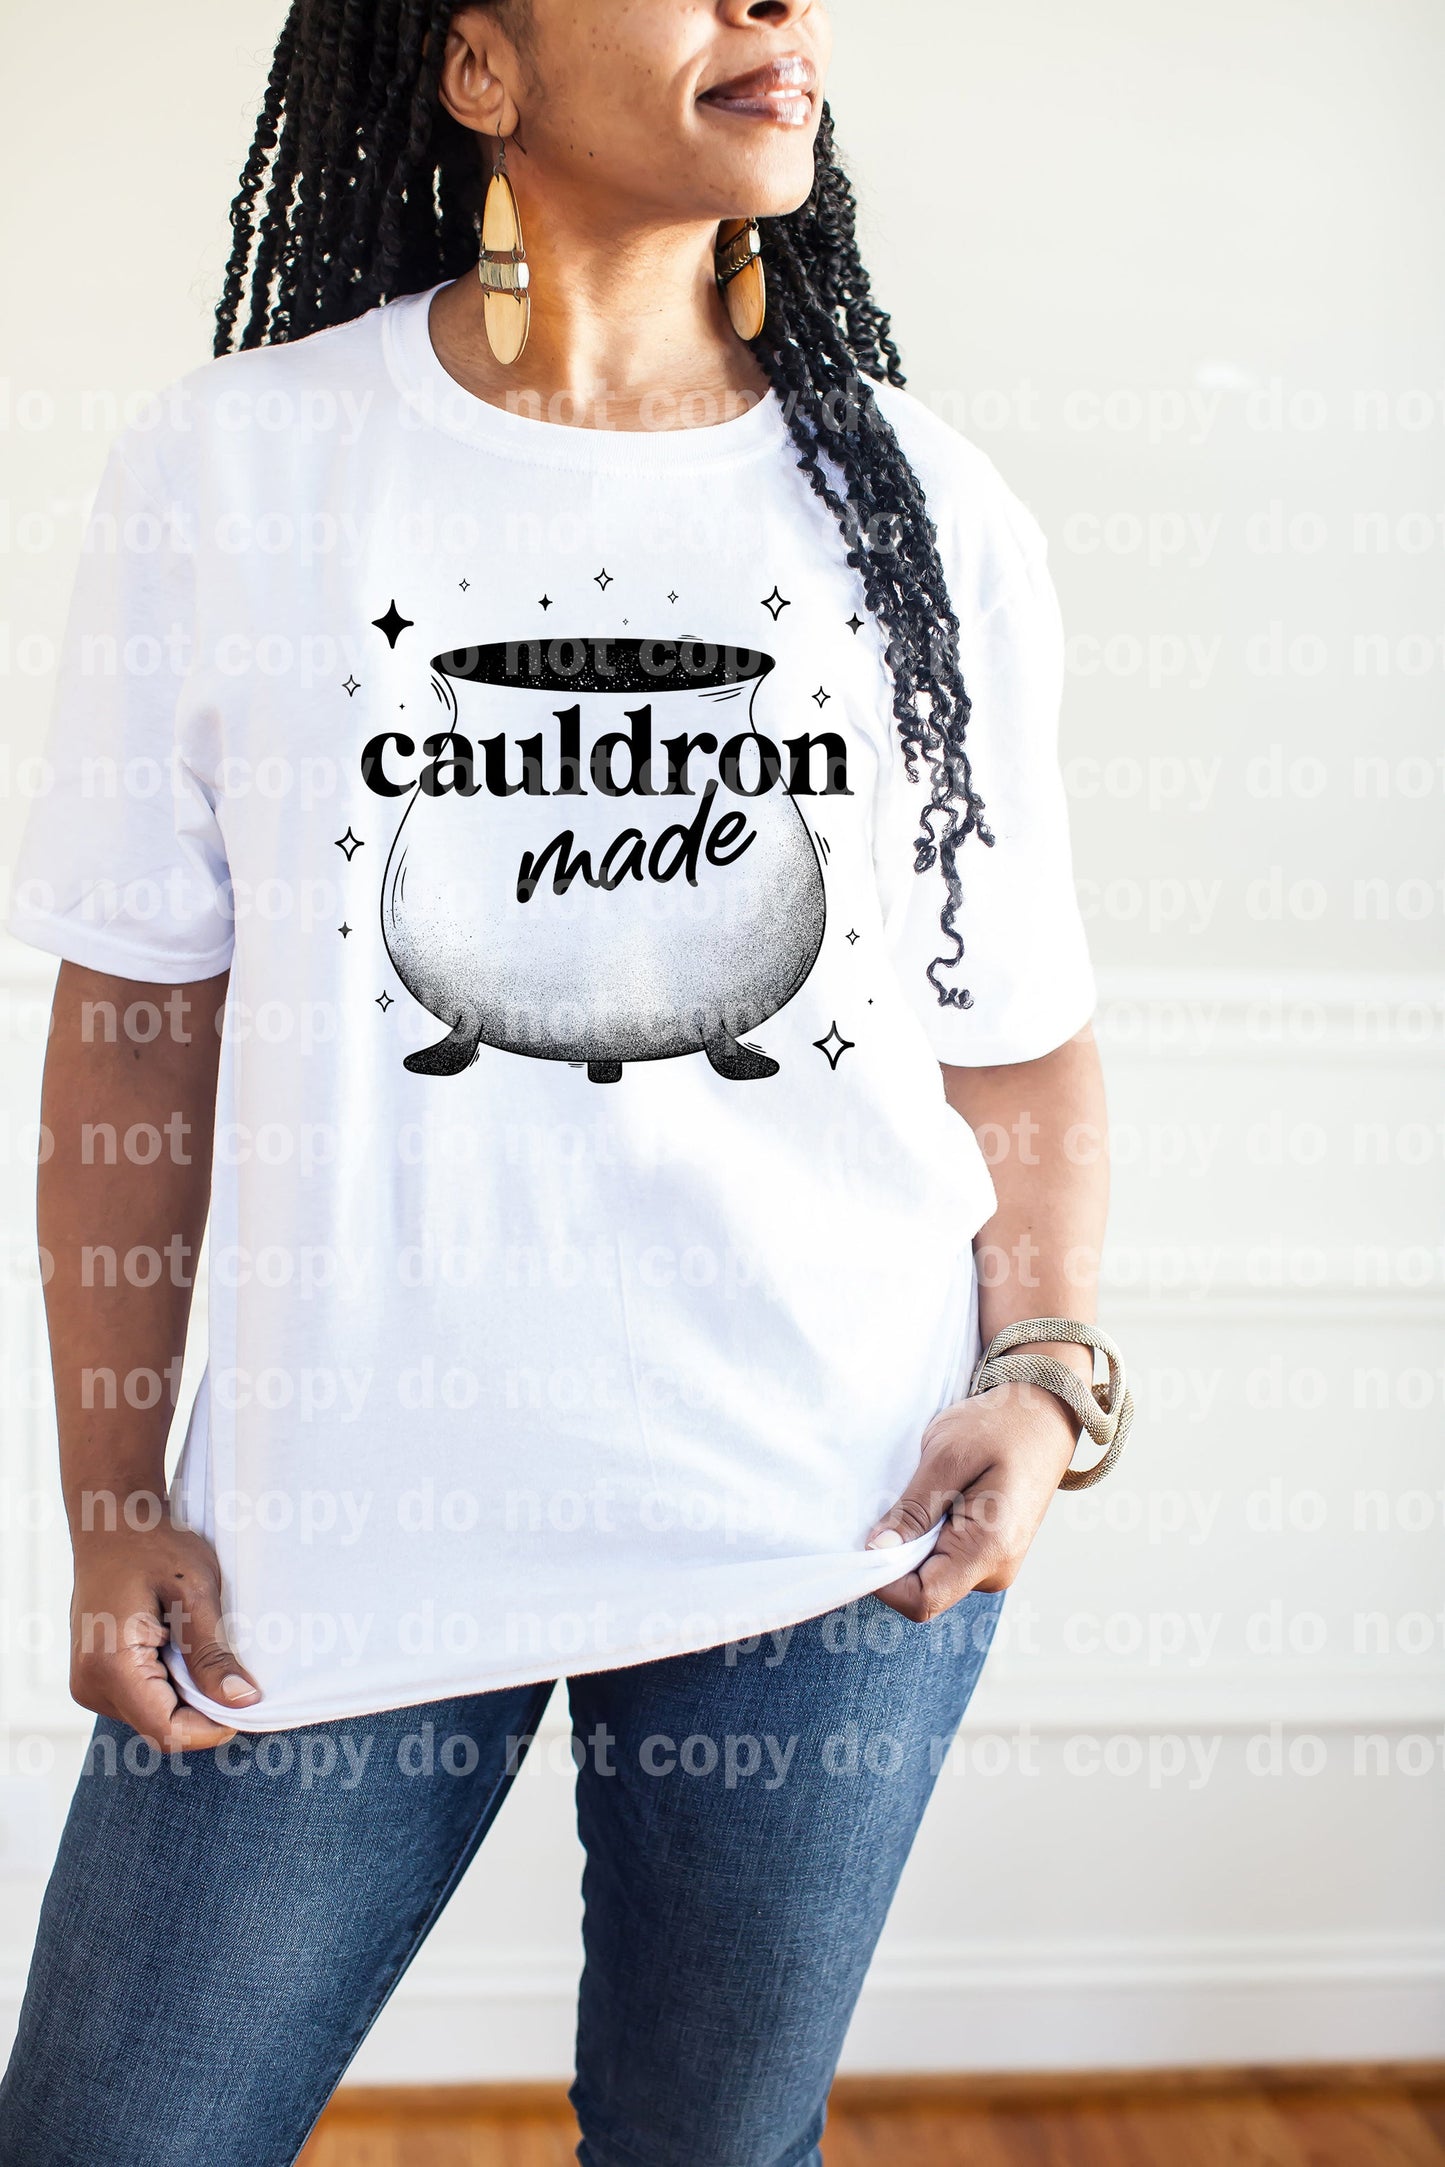 Cauldron Made Full Color/One Color Dream Print or Sublimation Print